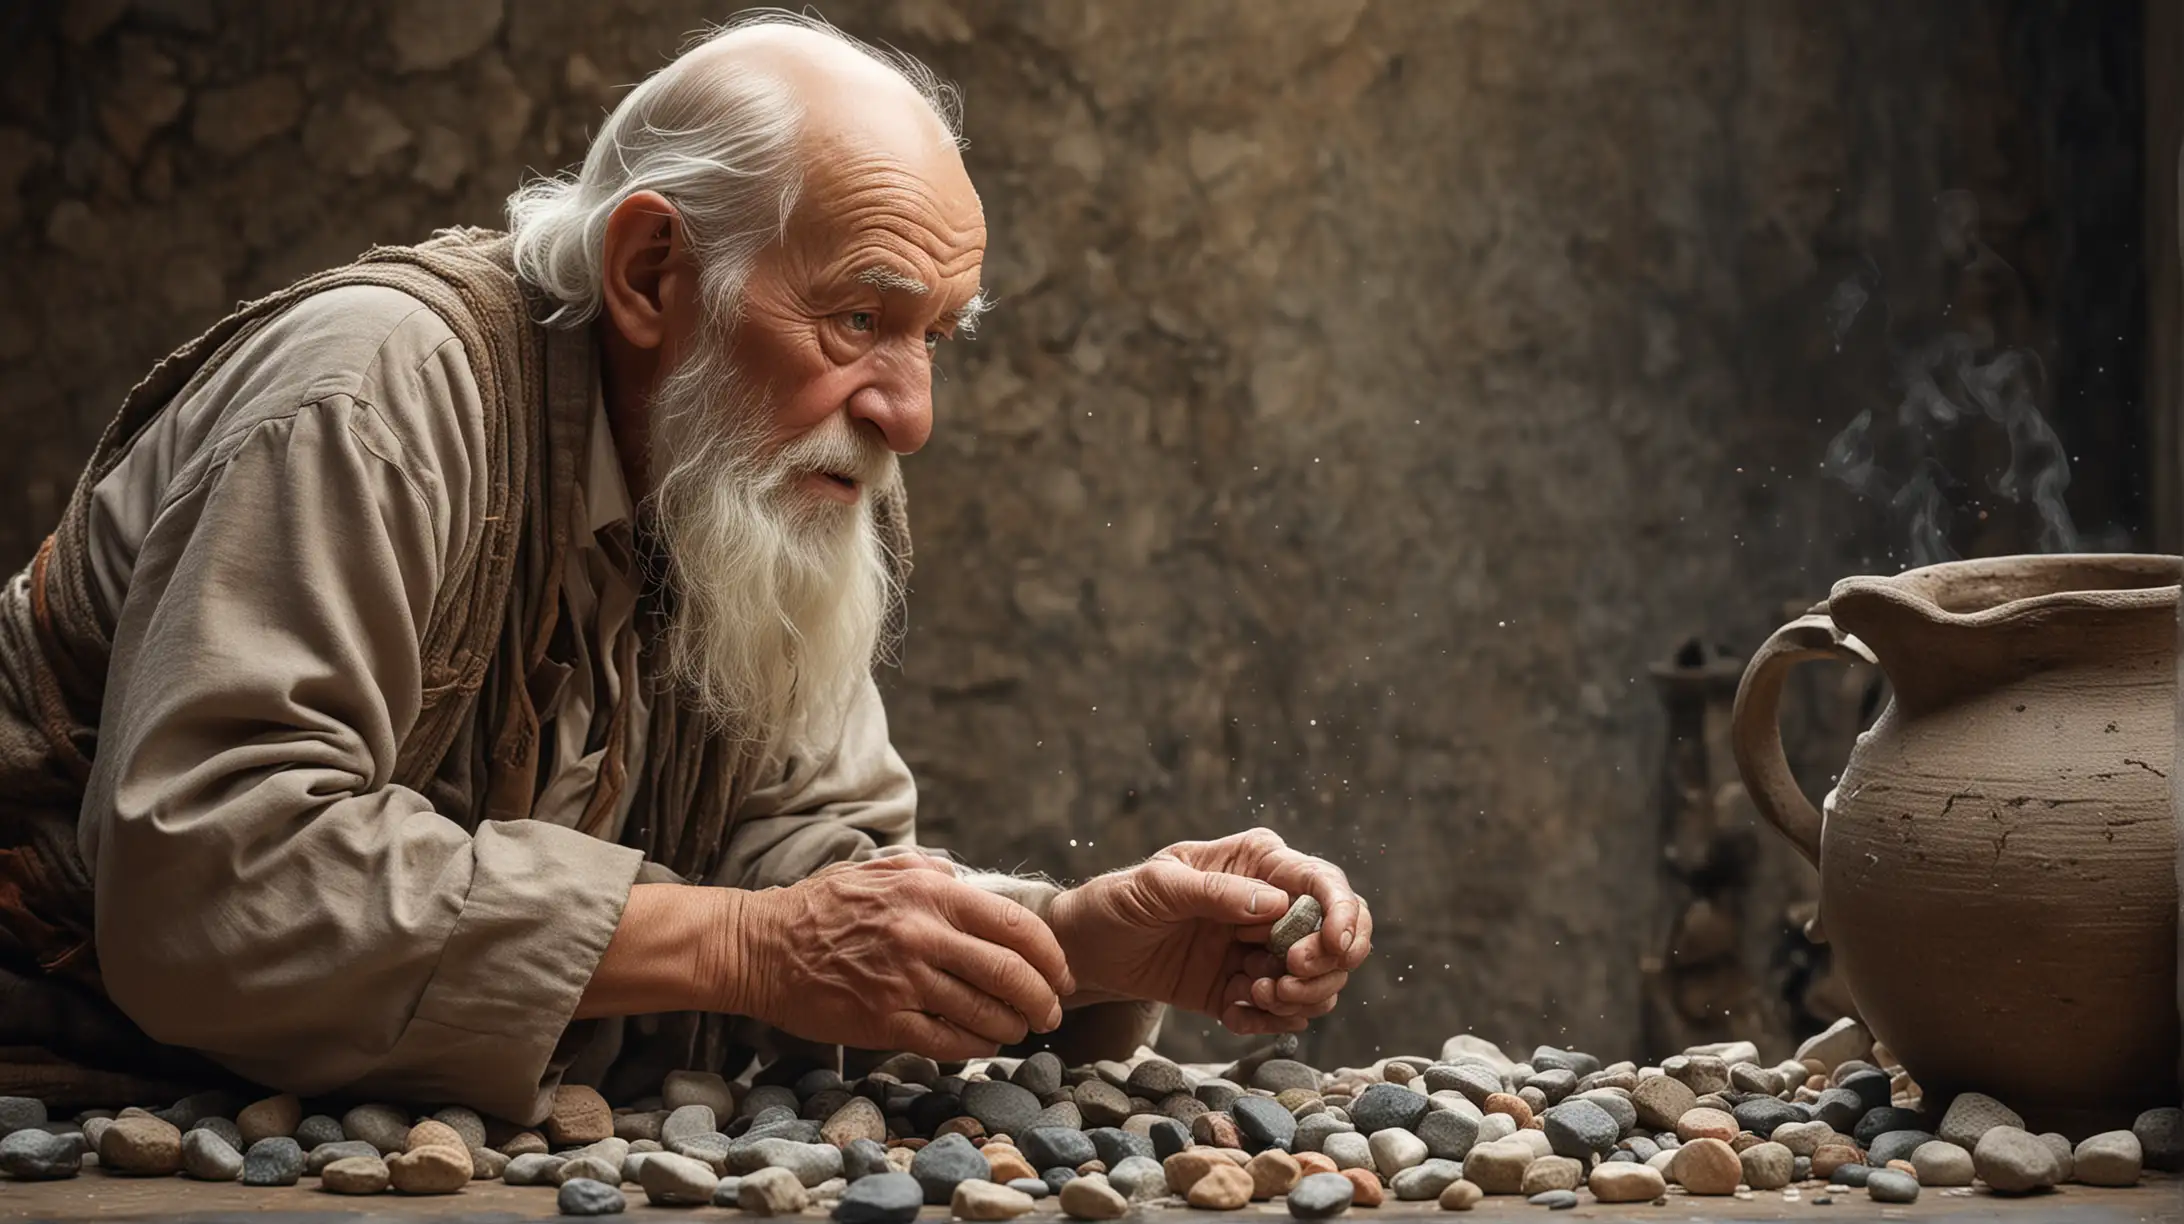 Old Man Scattering Small Stones into a Jug of Large Stones